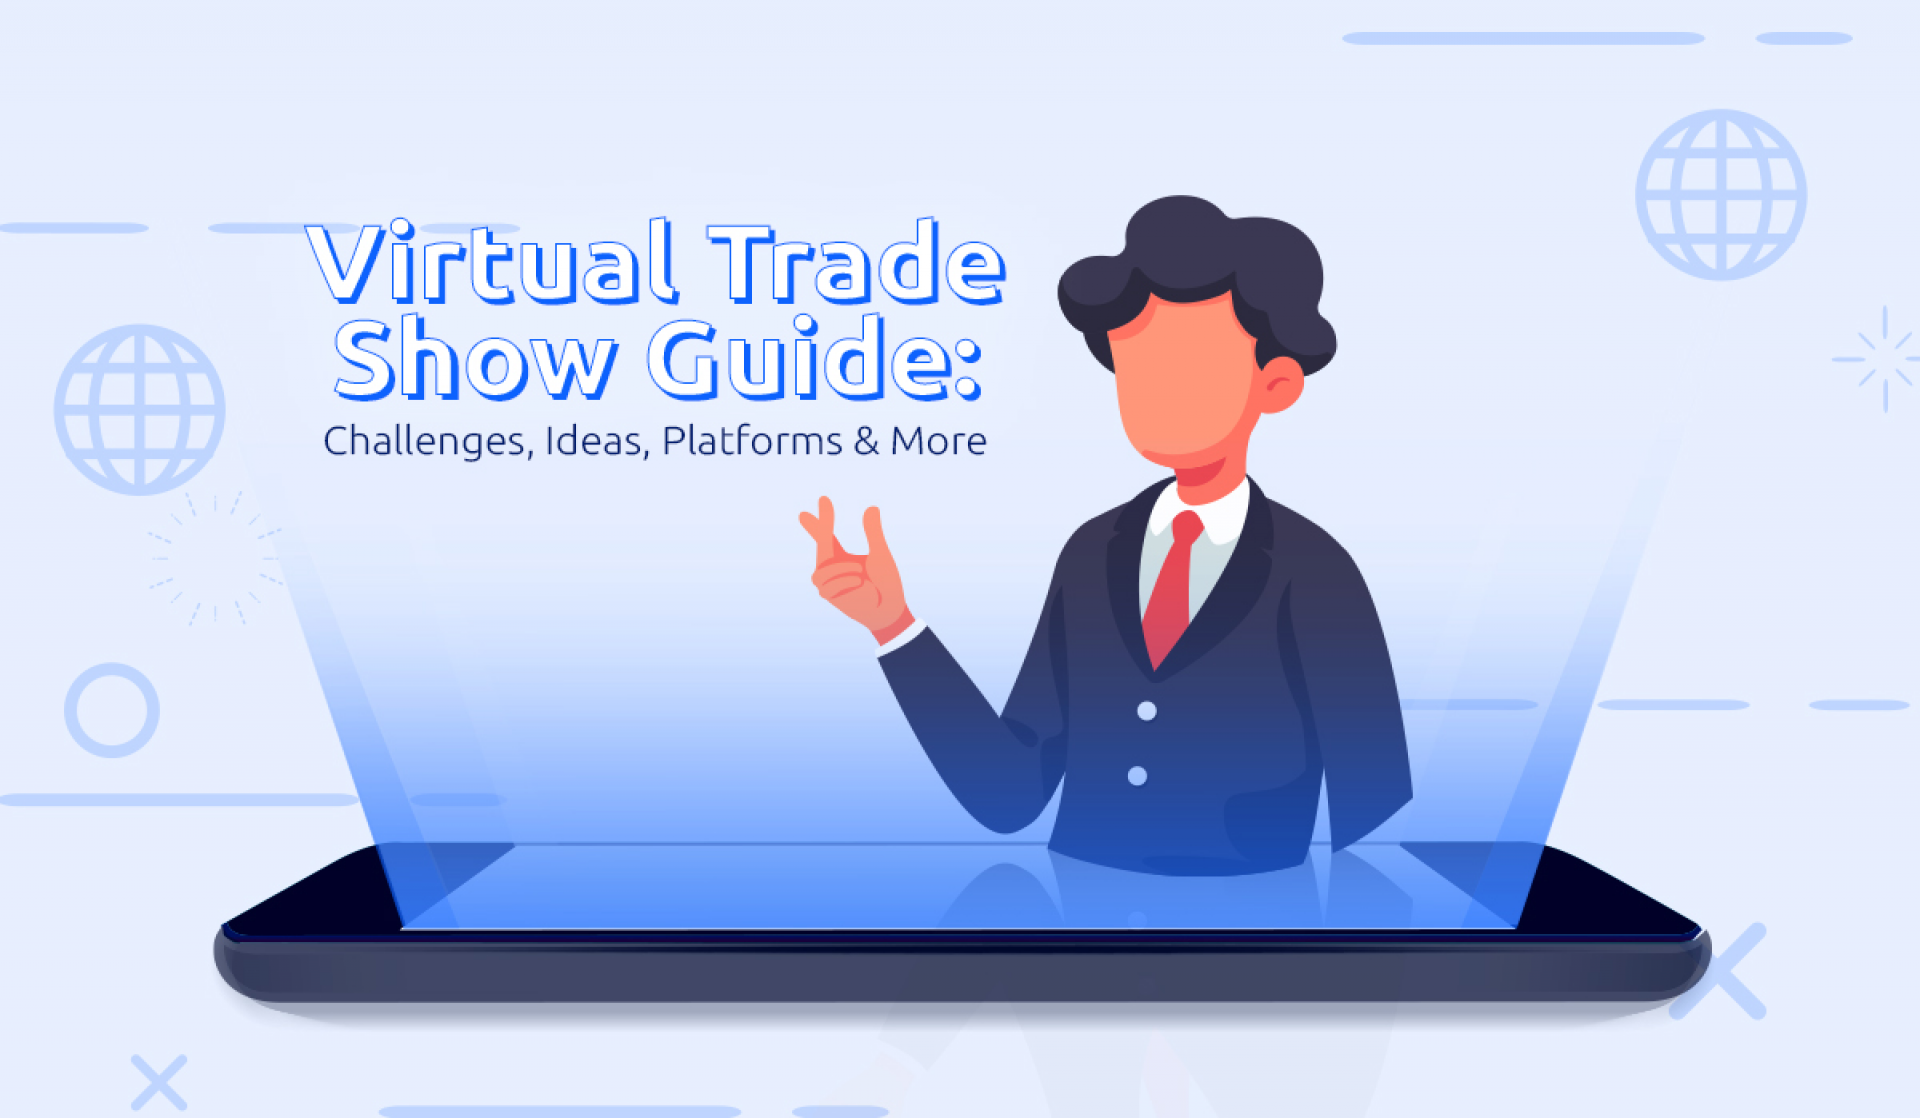 Virtual Trade Show Guide: Challenges, Ideas, Platforms & More